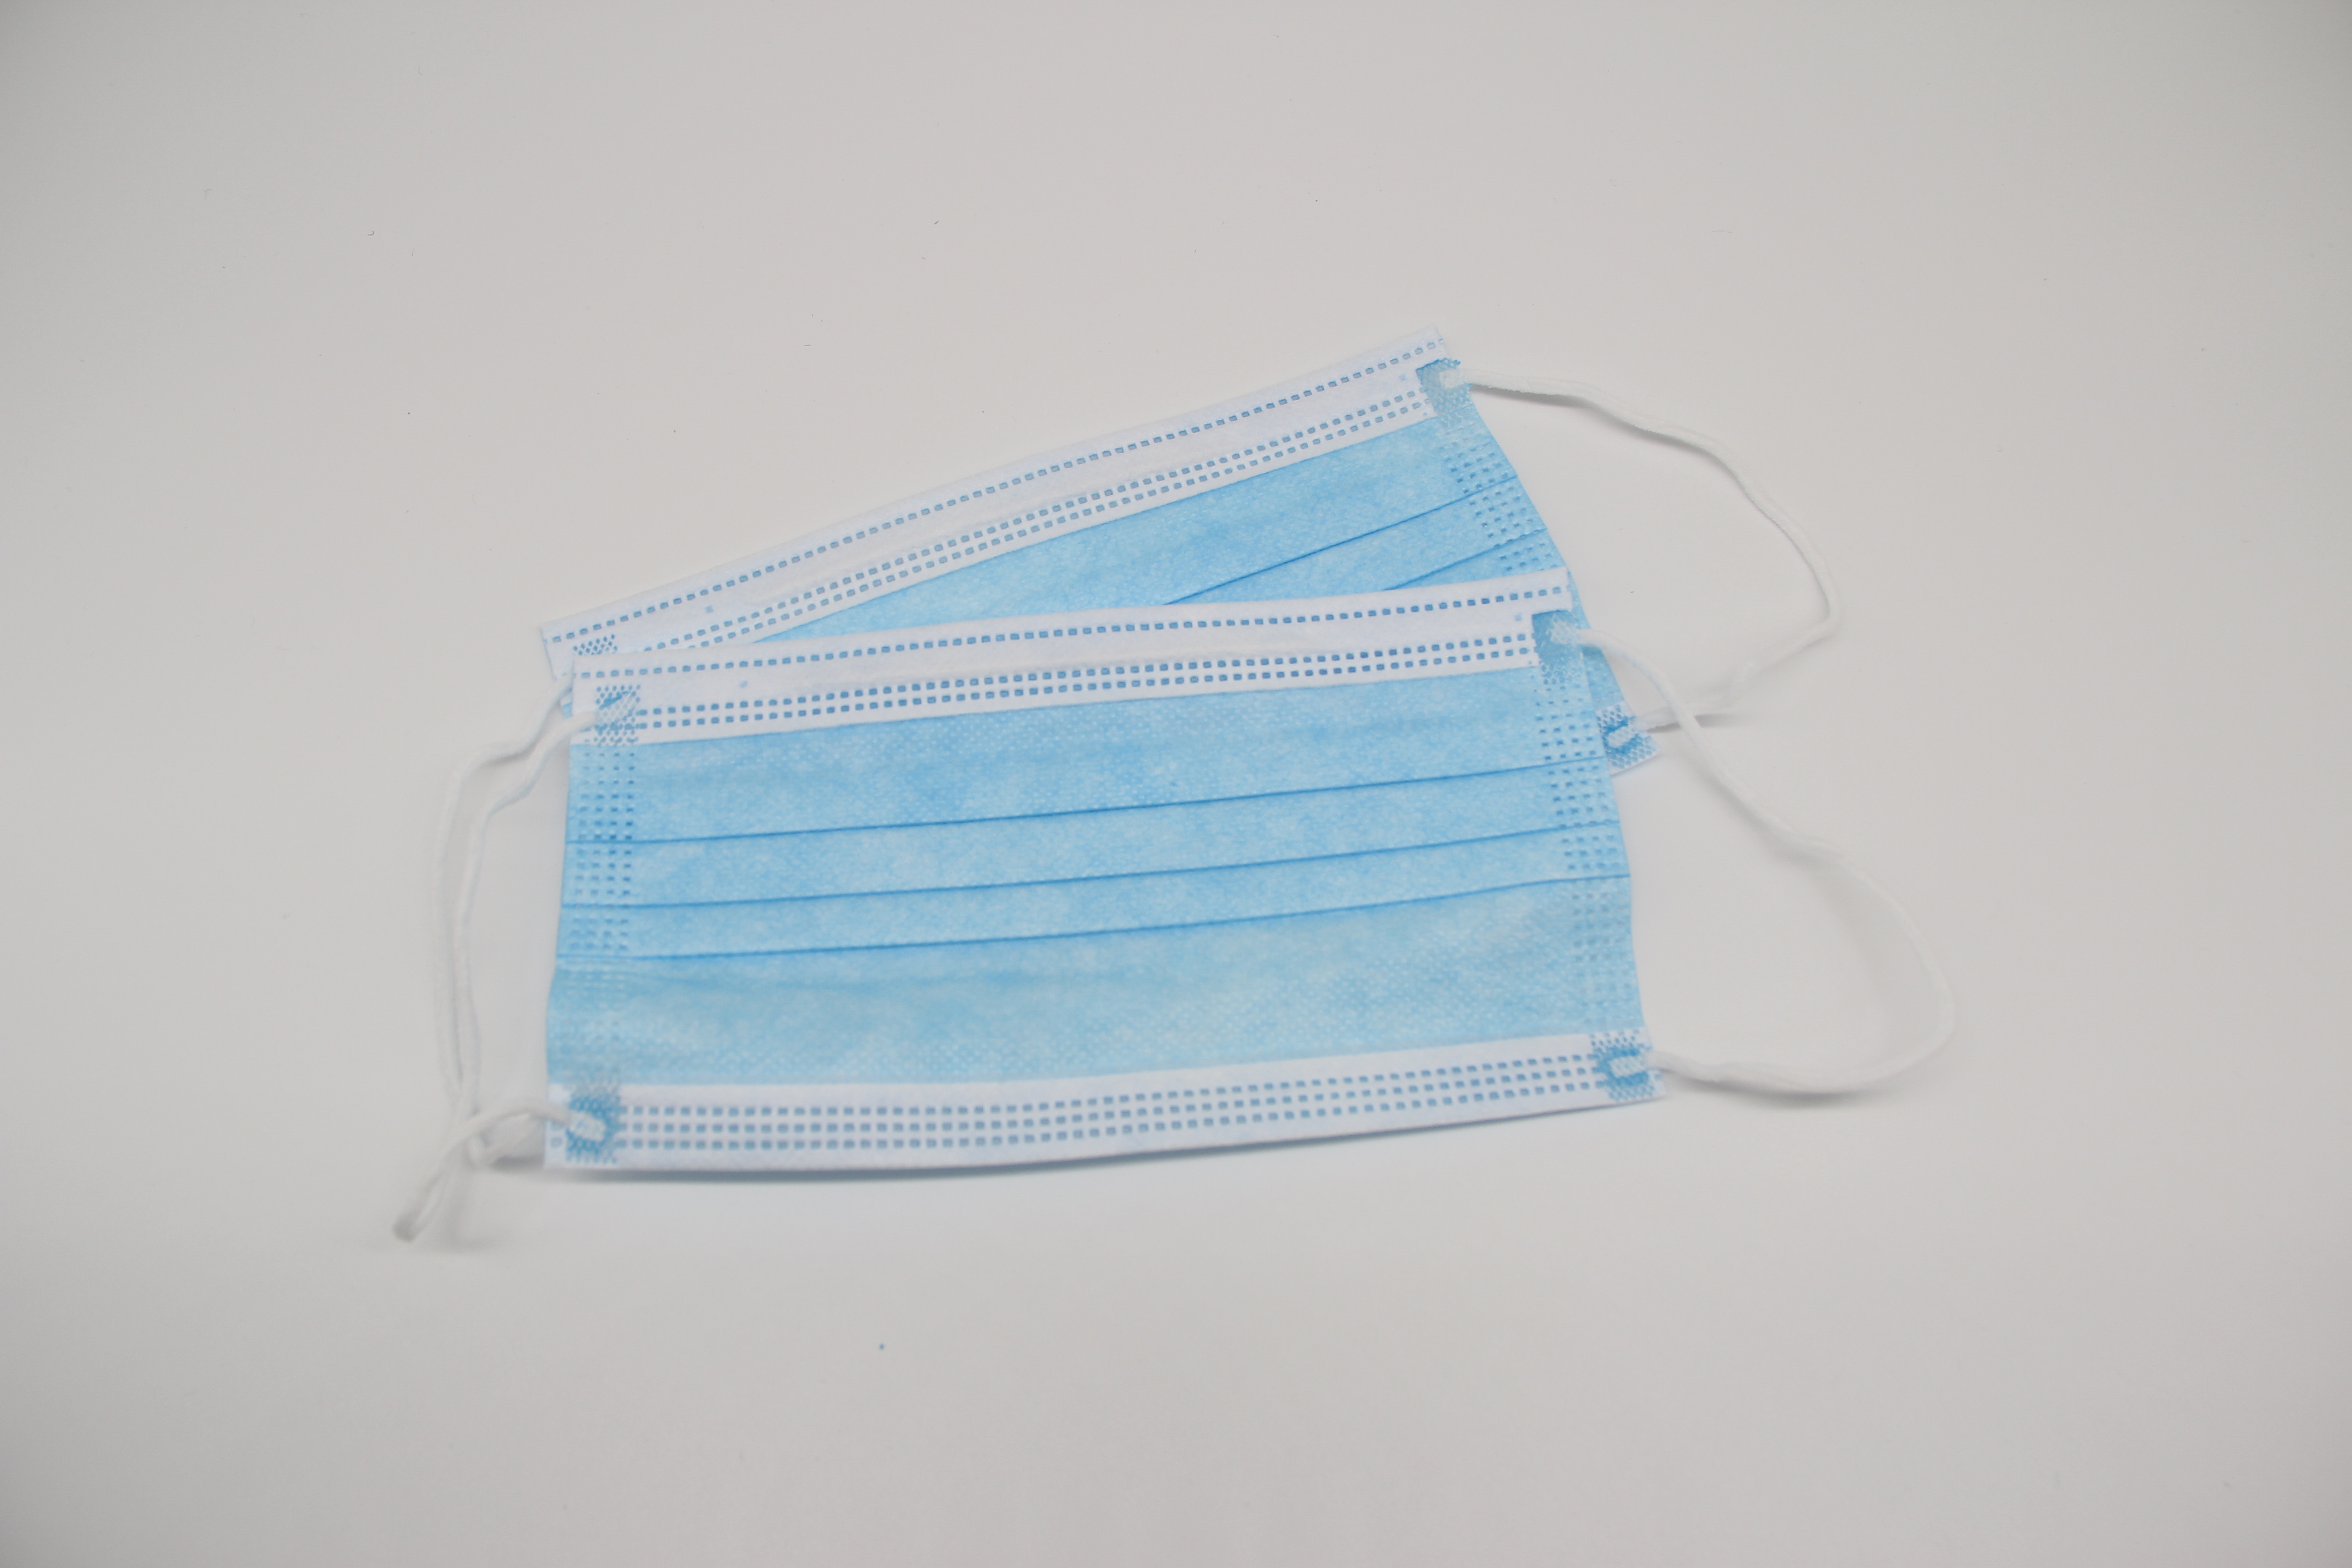 Surgical Face Mask with Earloop